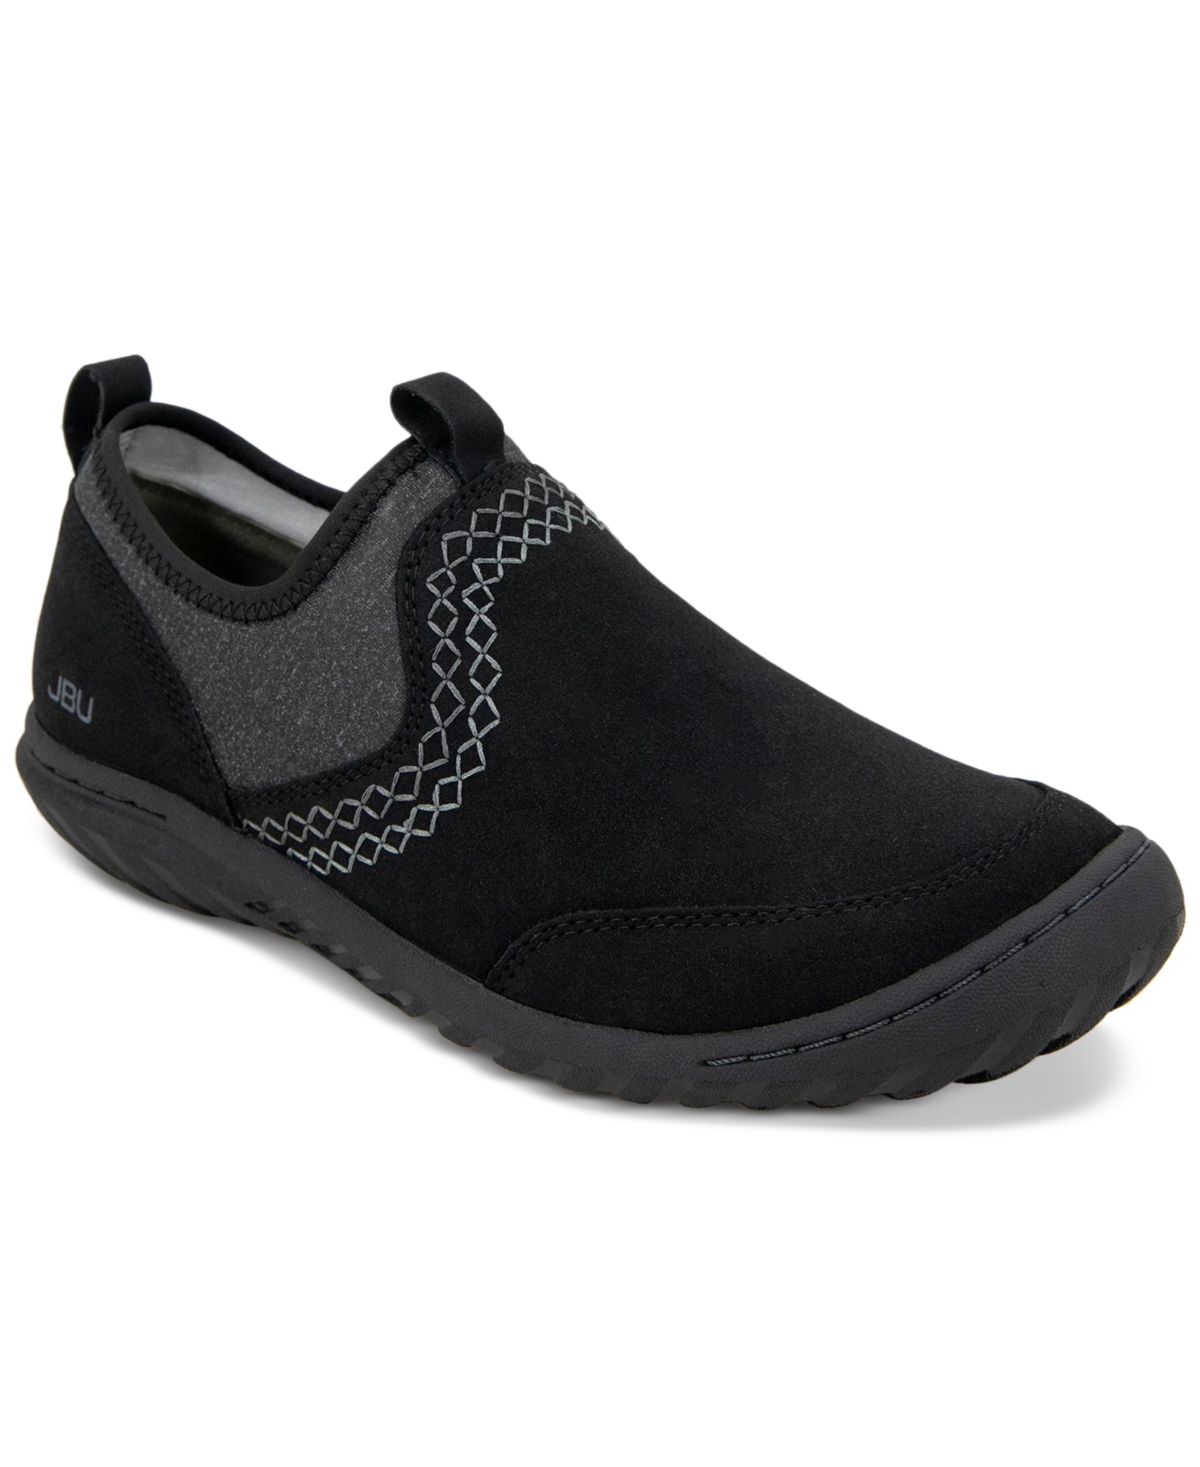 Women's Lucky Embellished Pull-On Sneakers - Black